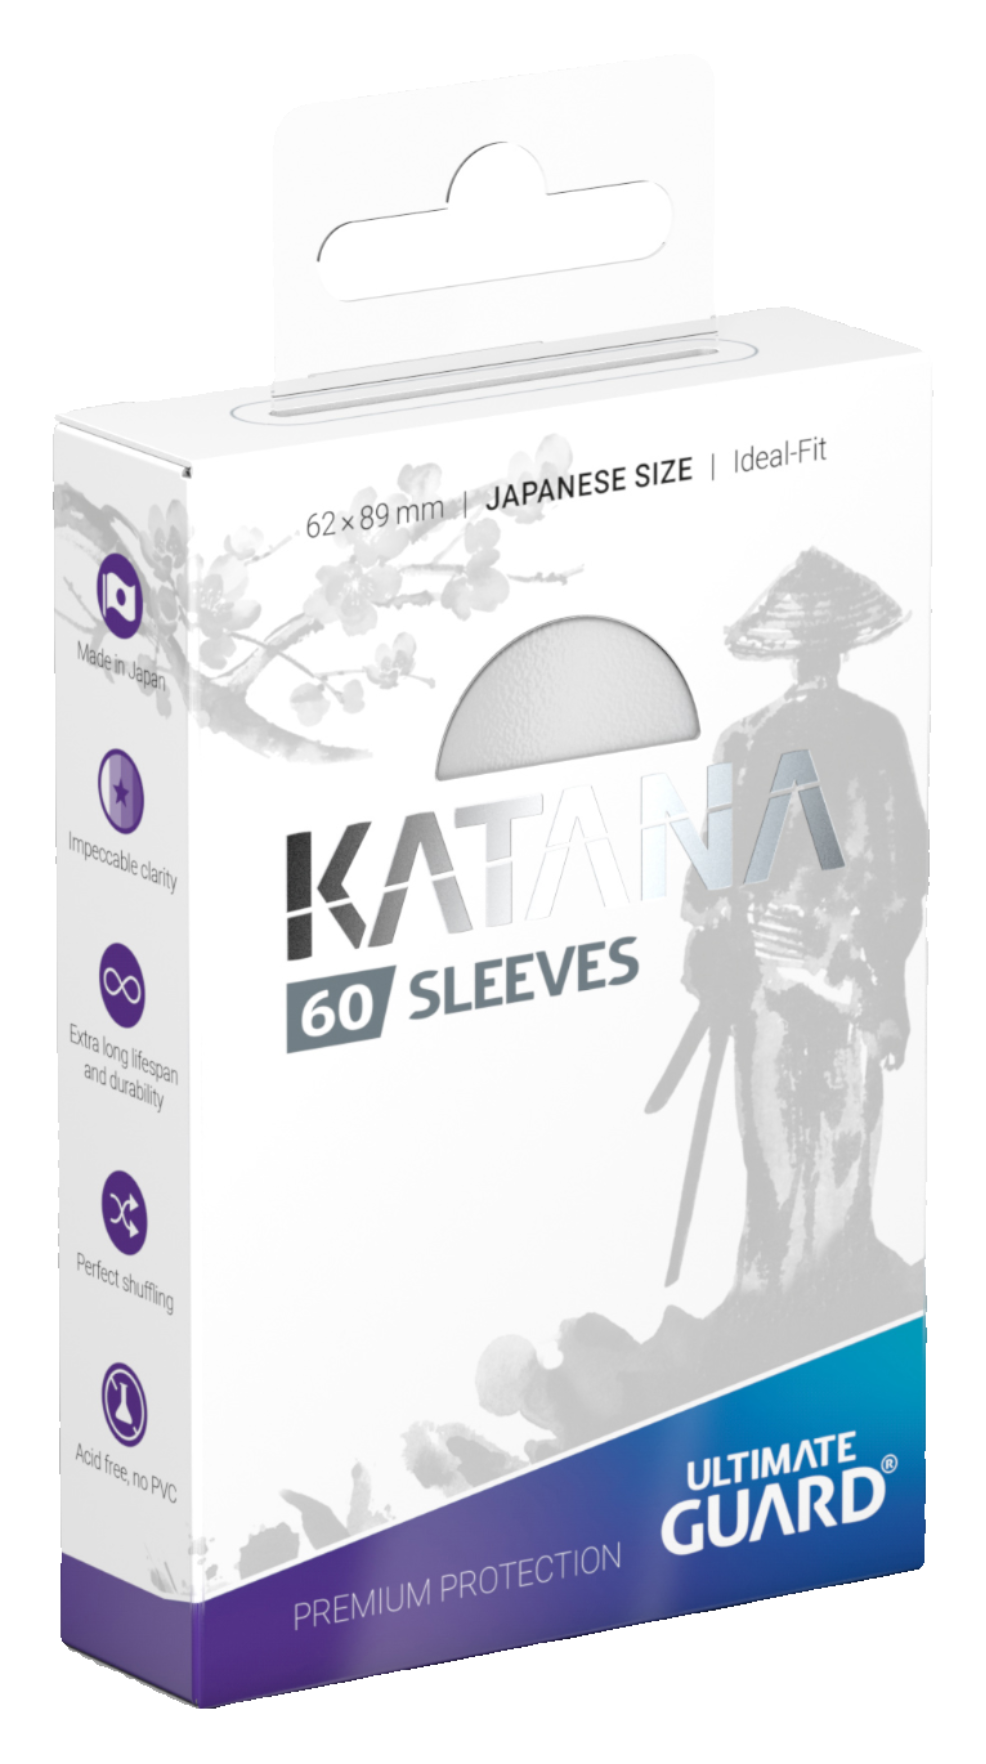 Ultimate Guard - Katana Sleeves - Japanese Size - Ideal-Fit - White - 60pk